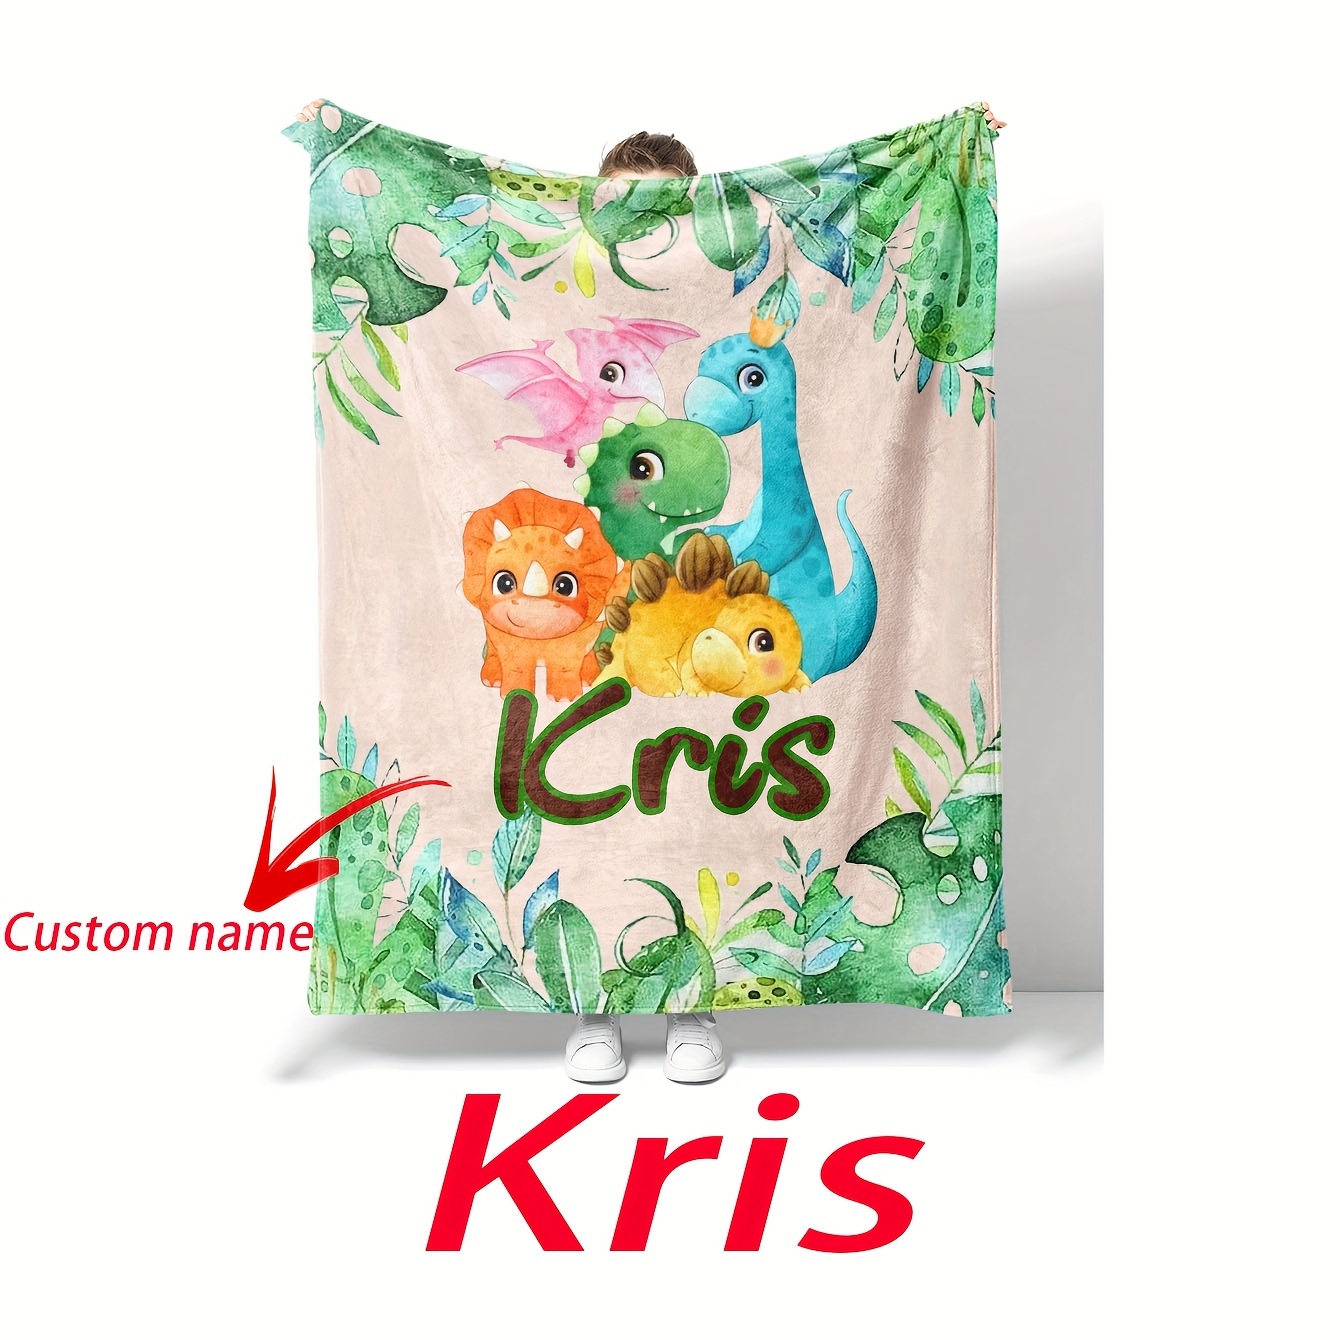 

1pc Custom Flannel Digital Printed Dinosaur Element Blanket, Personalized Name Custom Blanket, Suitable For Sofa, Bed, Nap, Interior Decoration, Perfect Gift Blanket For Family Or Friends, Gift